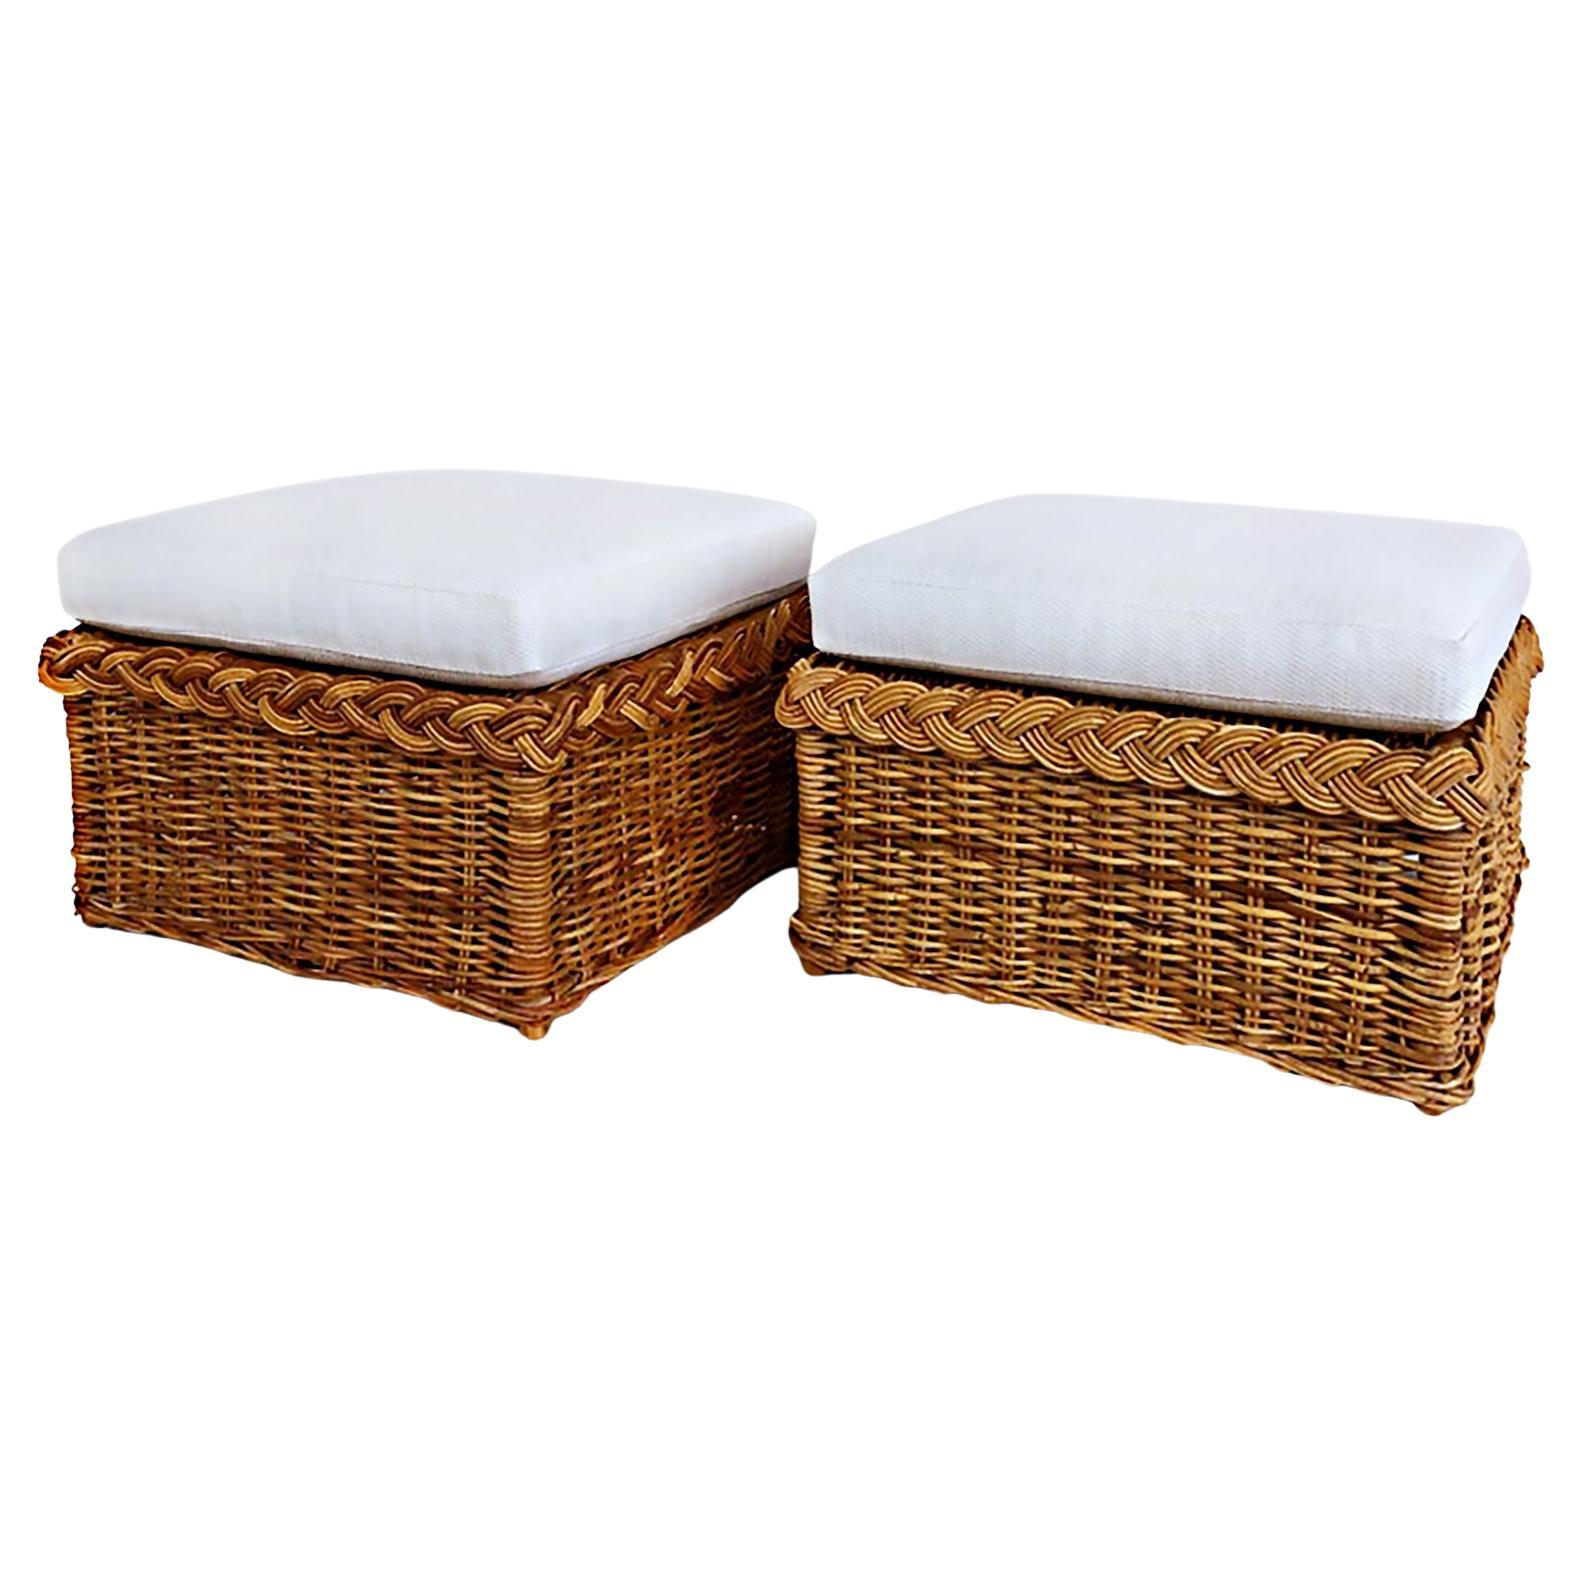 Wicker Works Rattan Ottomans with Newly Upholstered Cushions, Pair